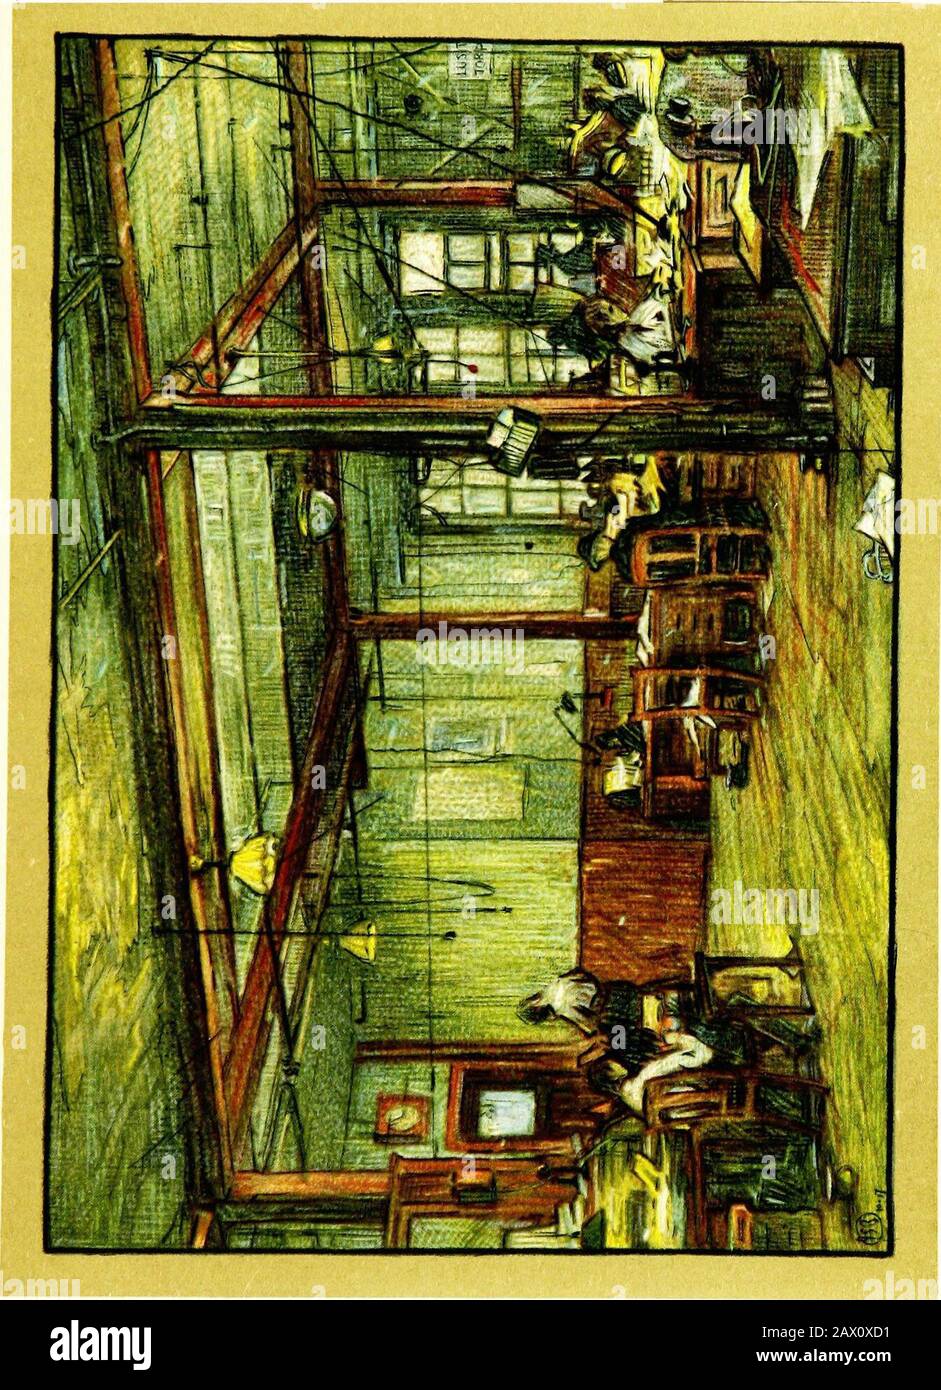 The Detroit news: eighteen hundred and seventy-three, nineteen hundred and seventeen, a record of progress: . is warranted in view of the fact that thetwo hours consumed in the acid bath in the old fashioned wooden rocker-tubis now reduced to forty minutes, even when a full-page cut is being etched. in an emergency, the engraving department can produce from a photograph,by the halftone photo-engraving process, a cut, ready to print, in twenty-oneminutes. Such speed is not productive of engravings of consistently high quality,and is not ordinarily attempted. A romantic element in the equipment Stock Photo